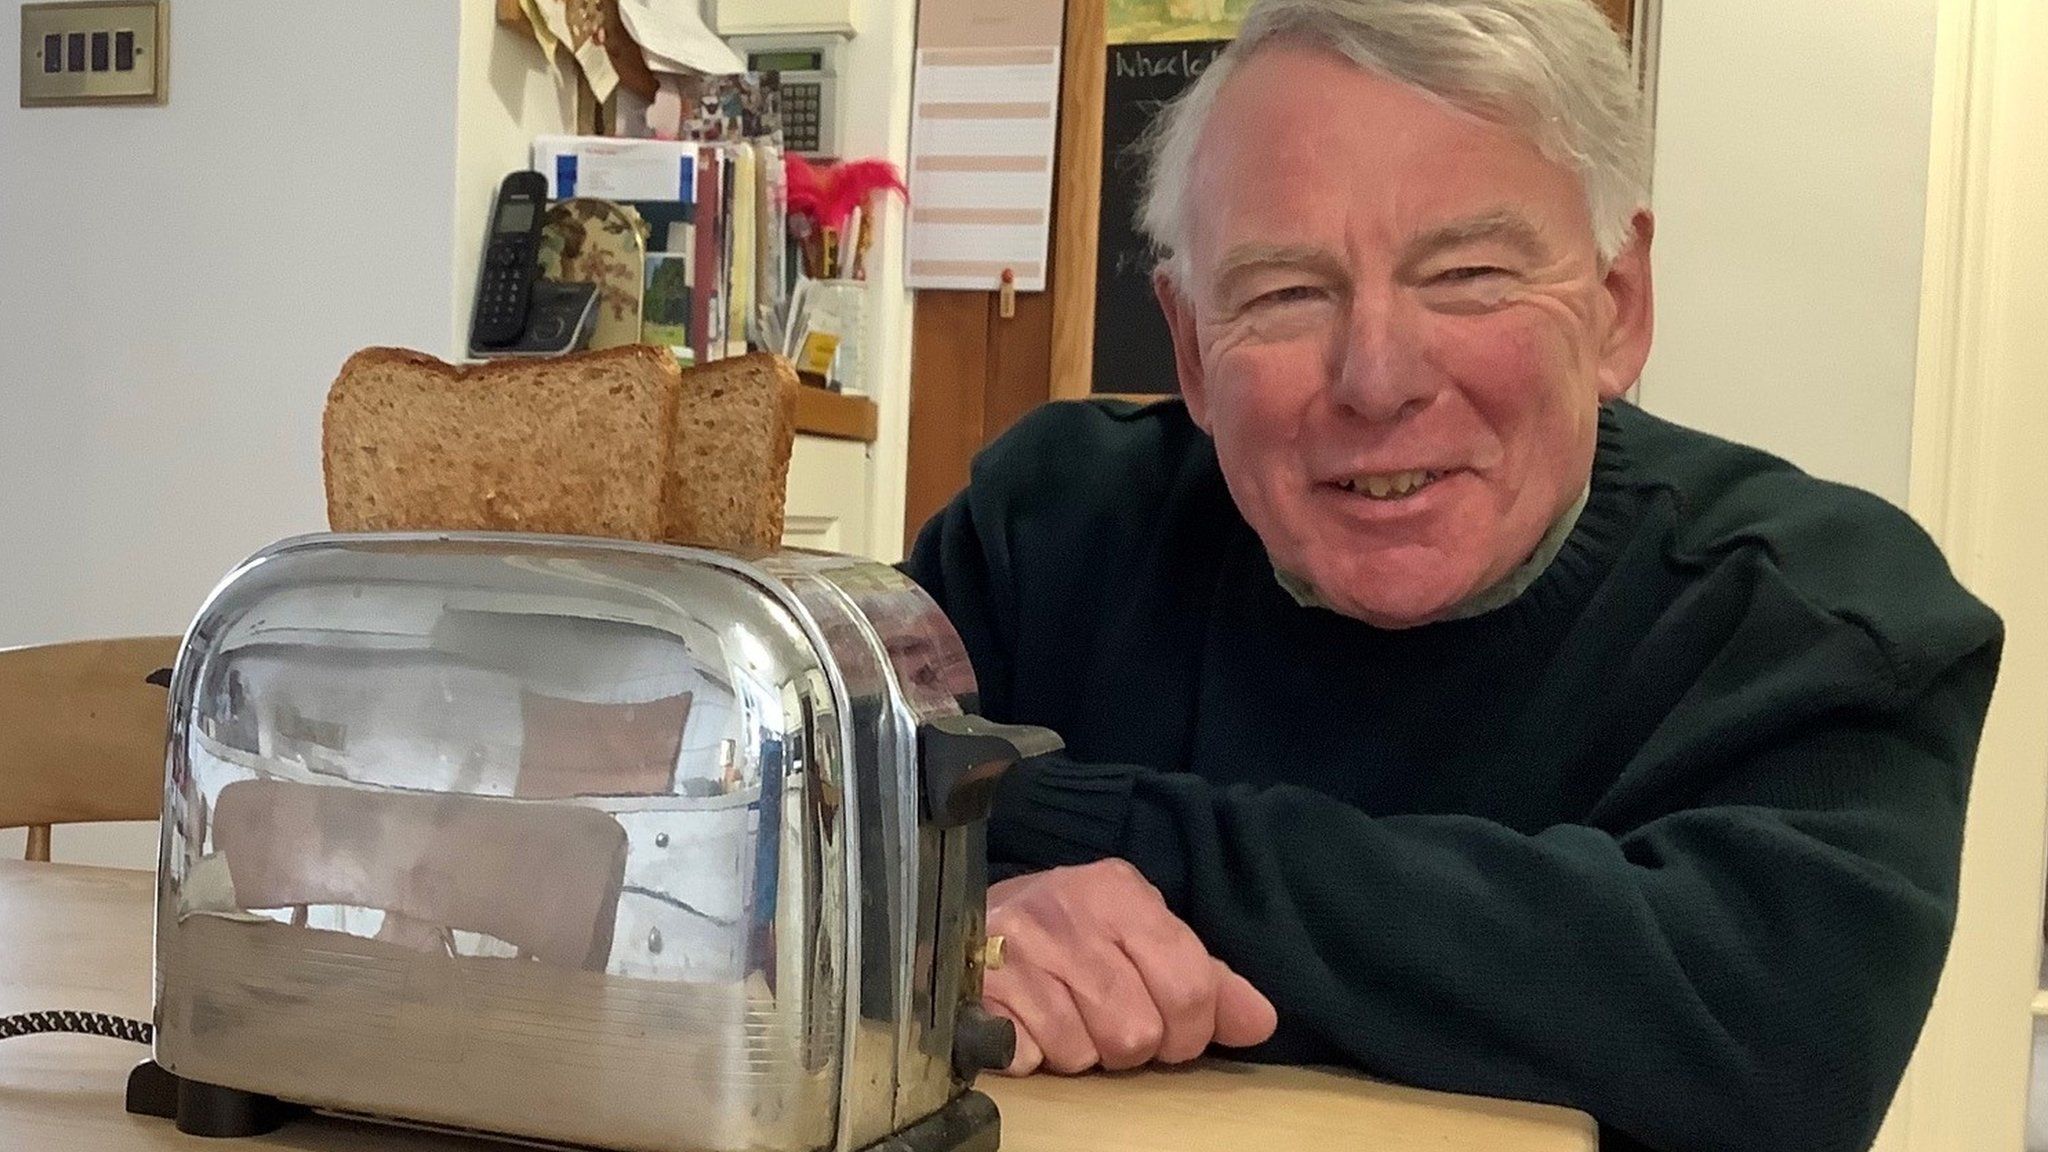 Jimmy James with his toaster